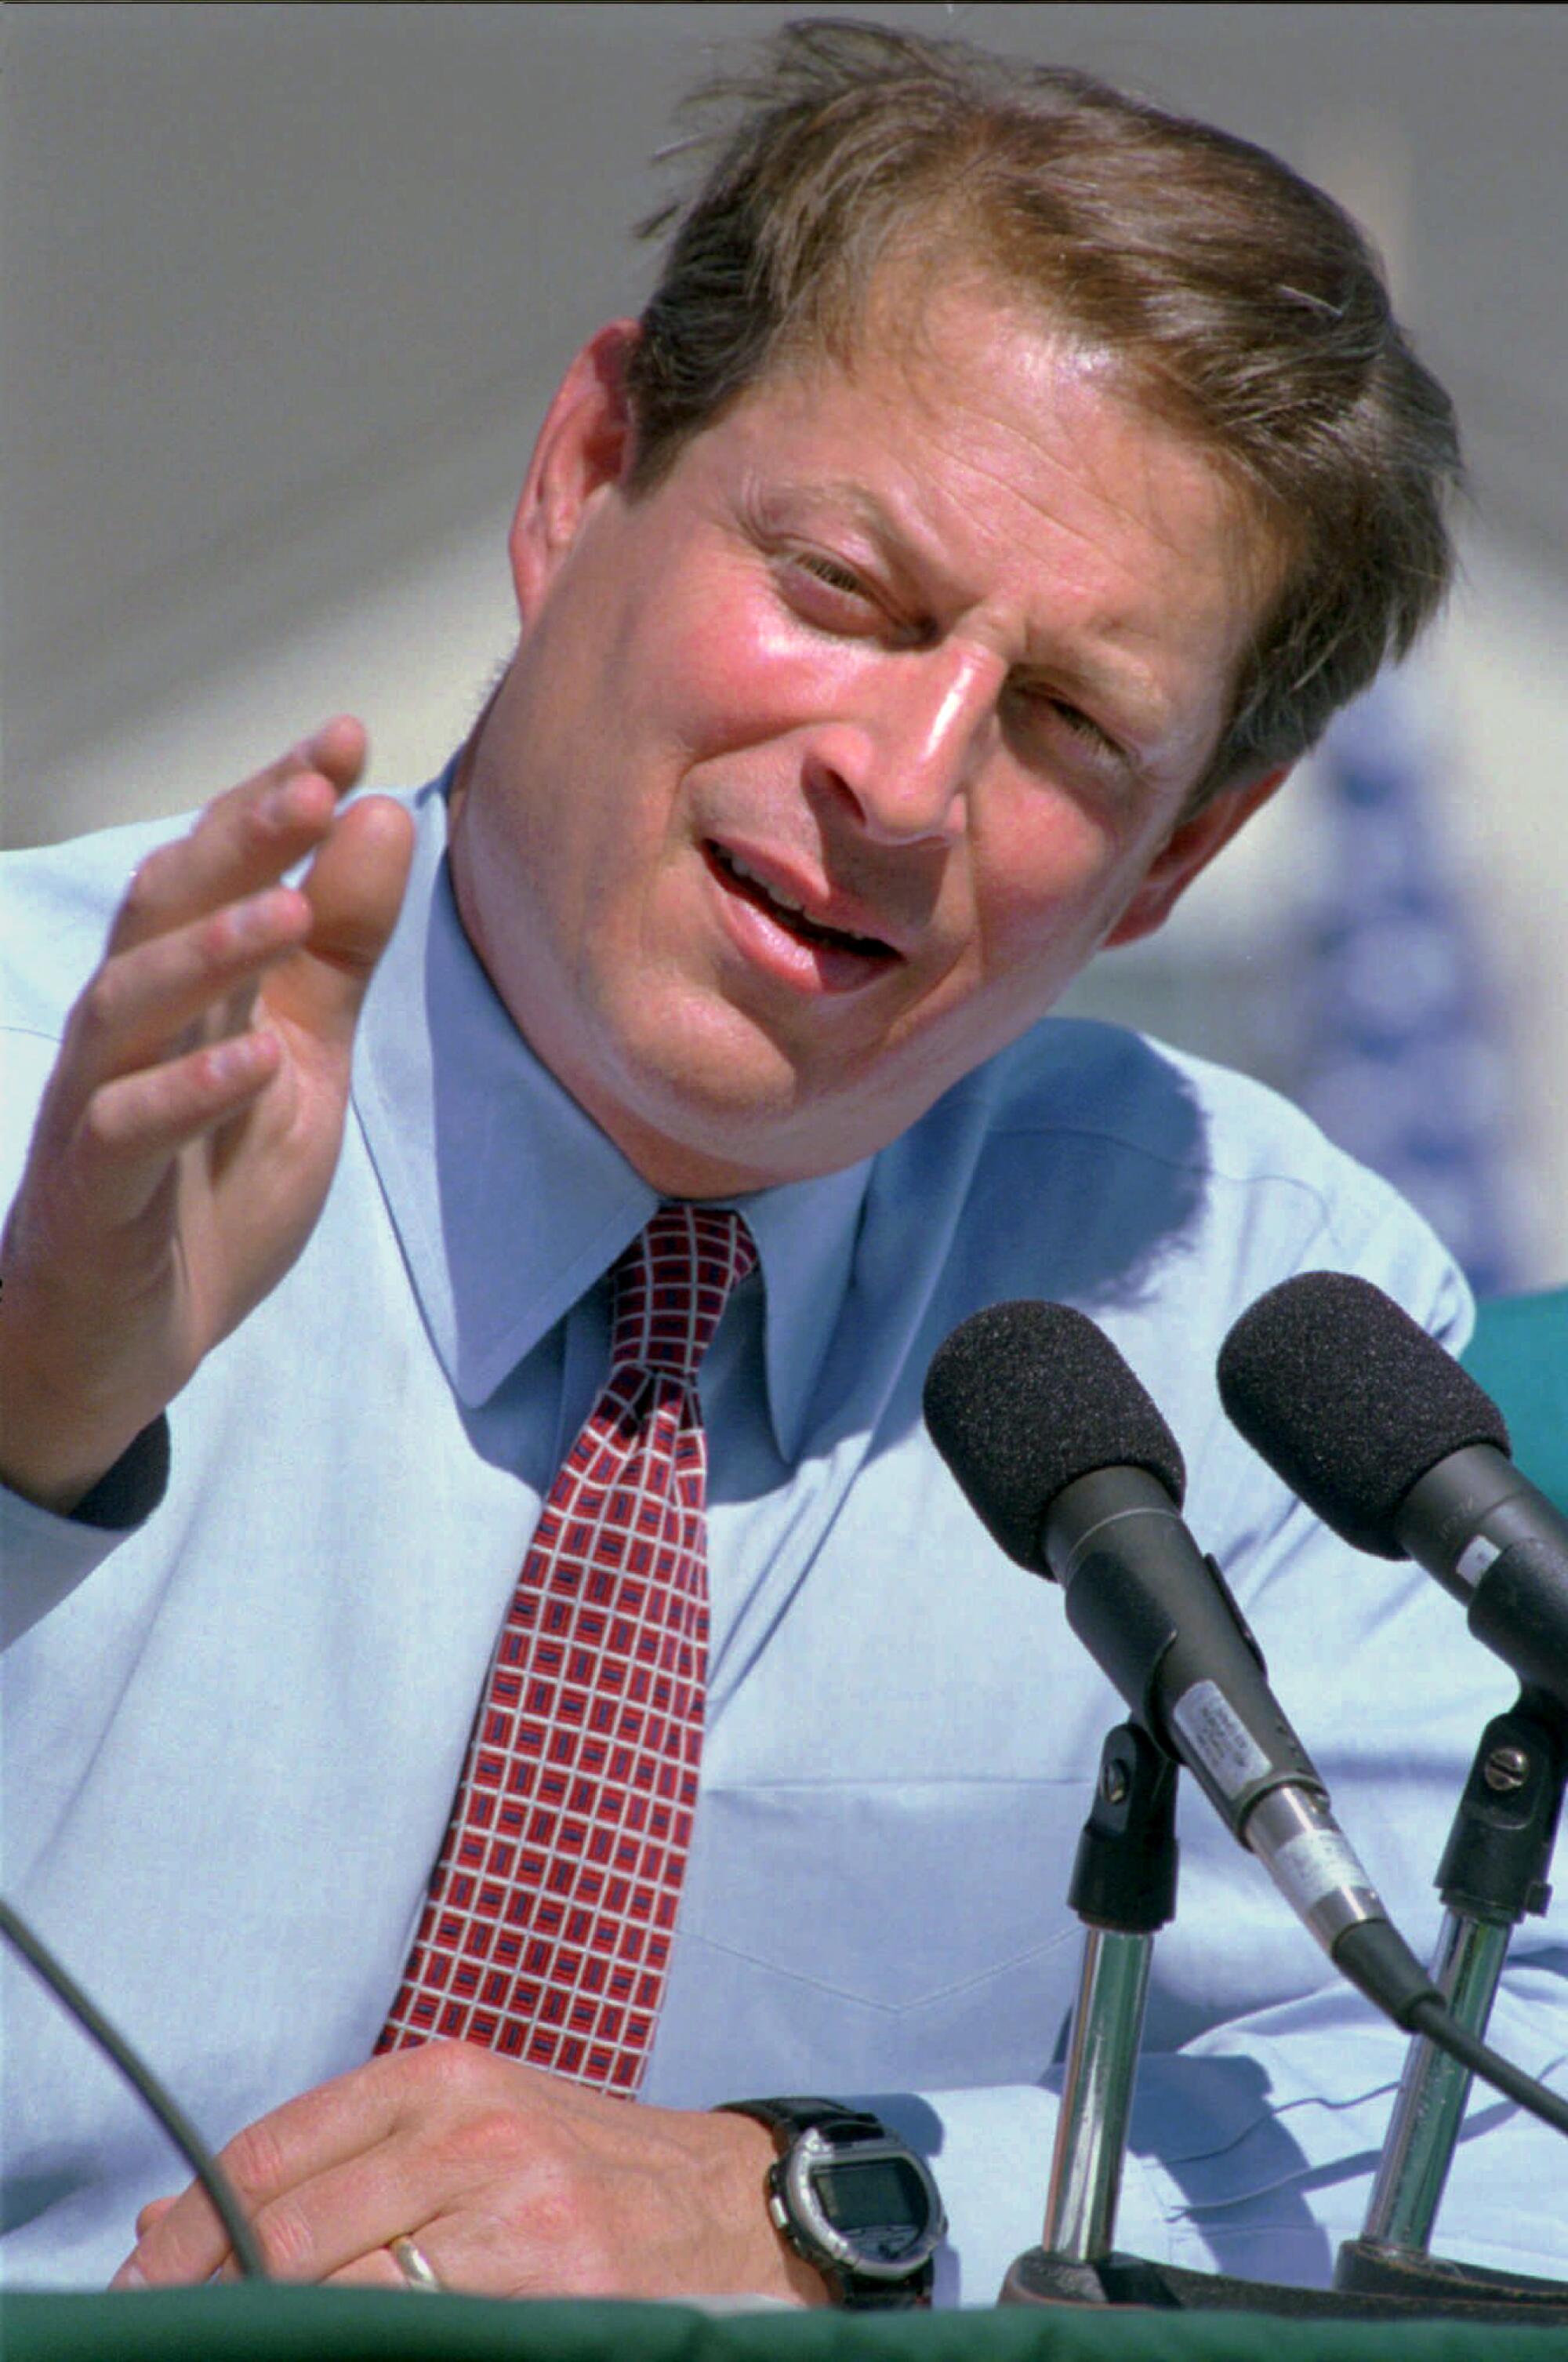 A vertical head-and-shoulders frame of Al Gore in front of microphones, gesturing with his right arm